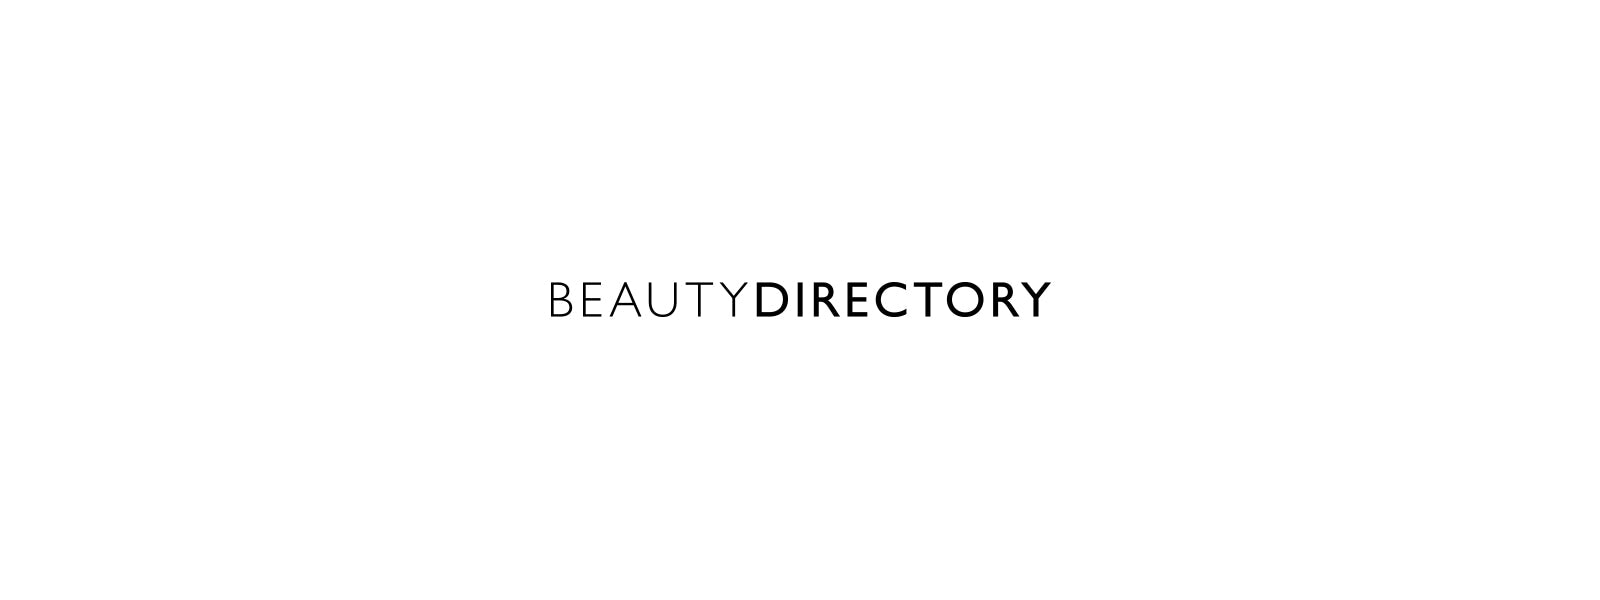 BEAUTYDIRECTORY – What's the next wellbeing wonder?